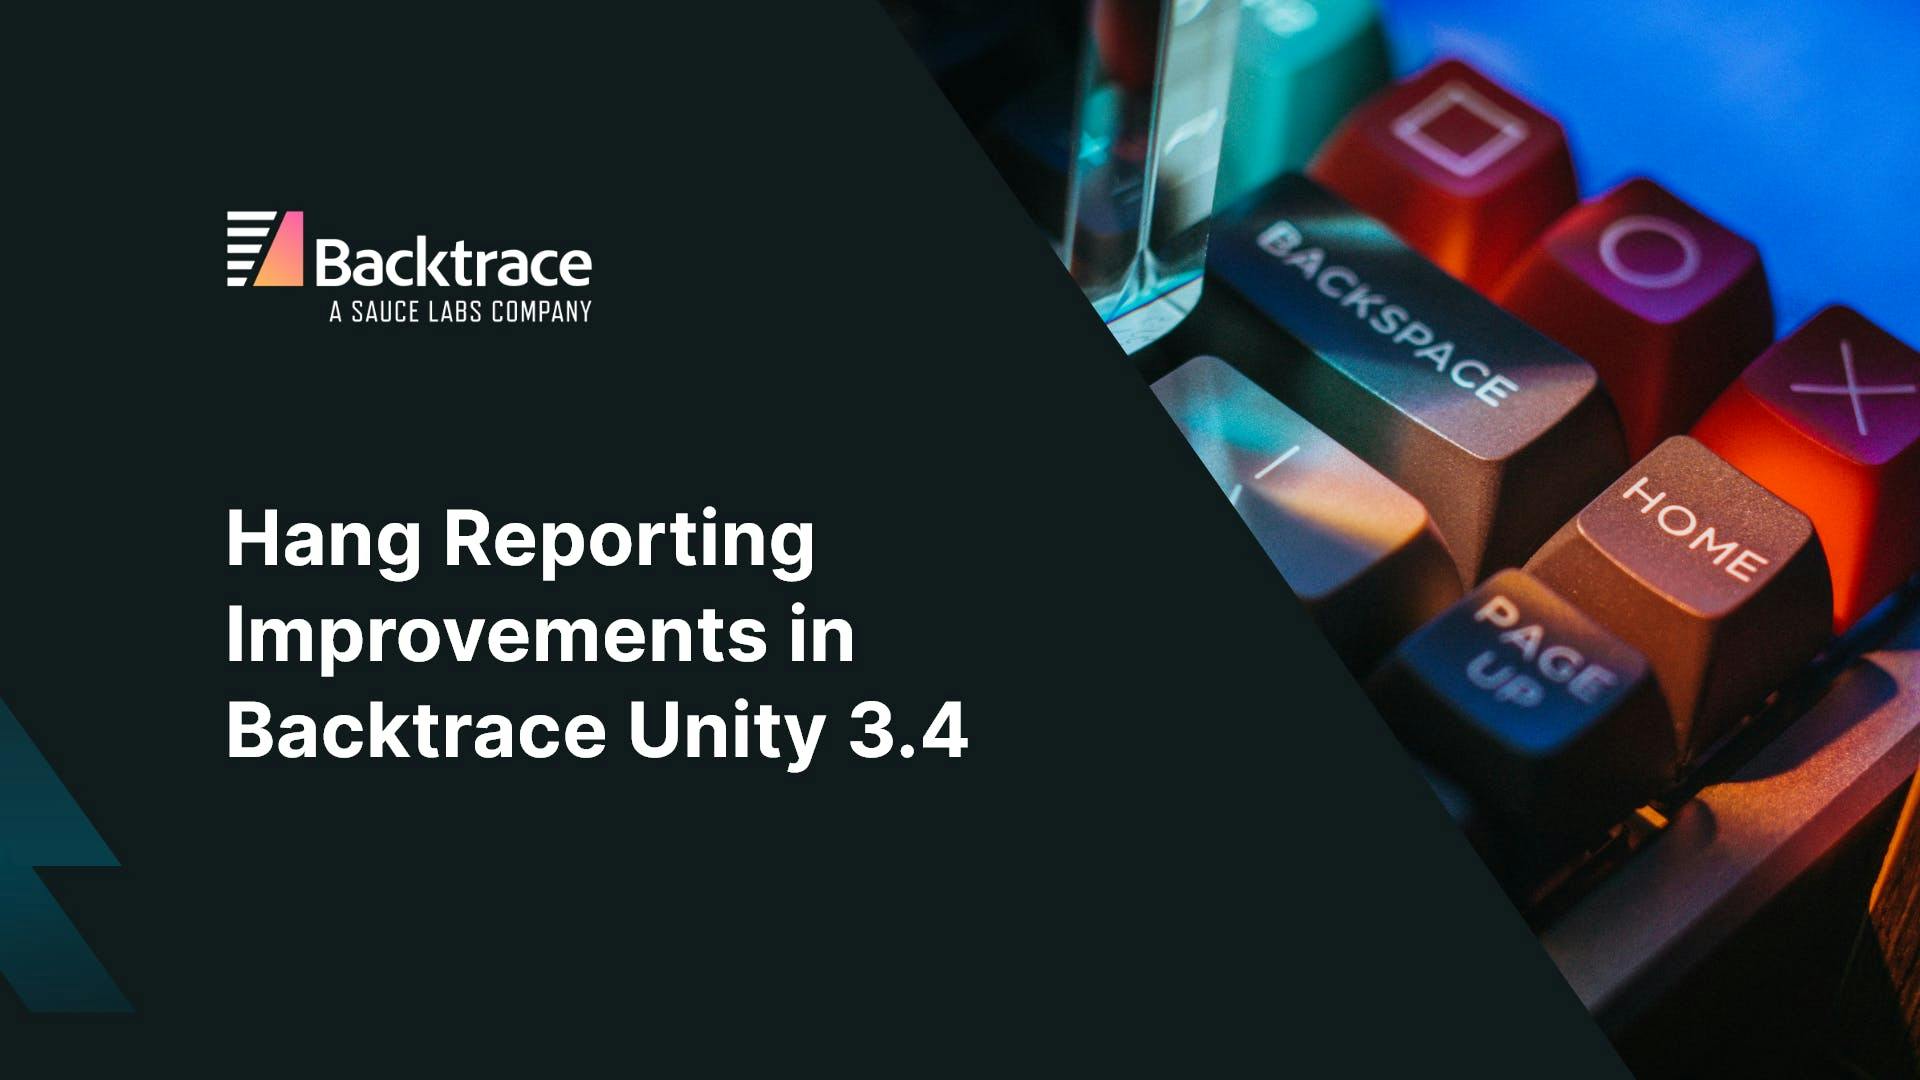 Thumbnail image for blog post: Hang Reporting Improvements In Backtrace-Unity 3.4 Release